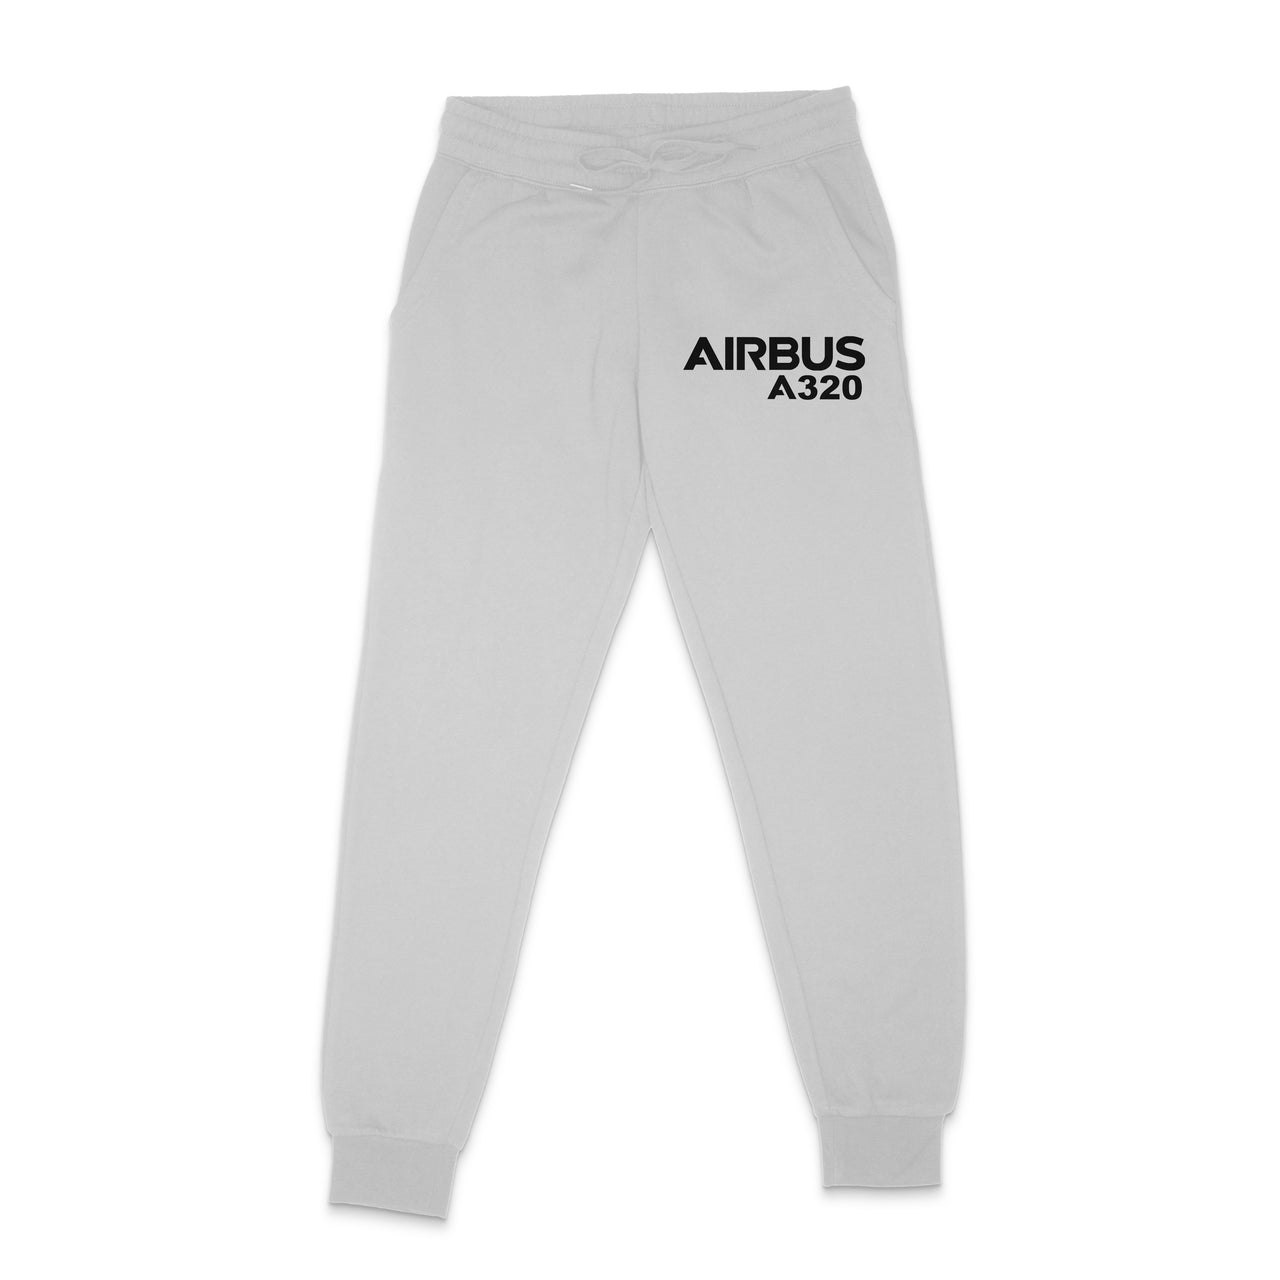 Airbus A320 & Text Designed Sweatpants